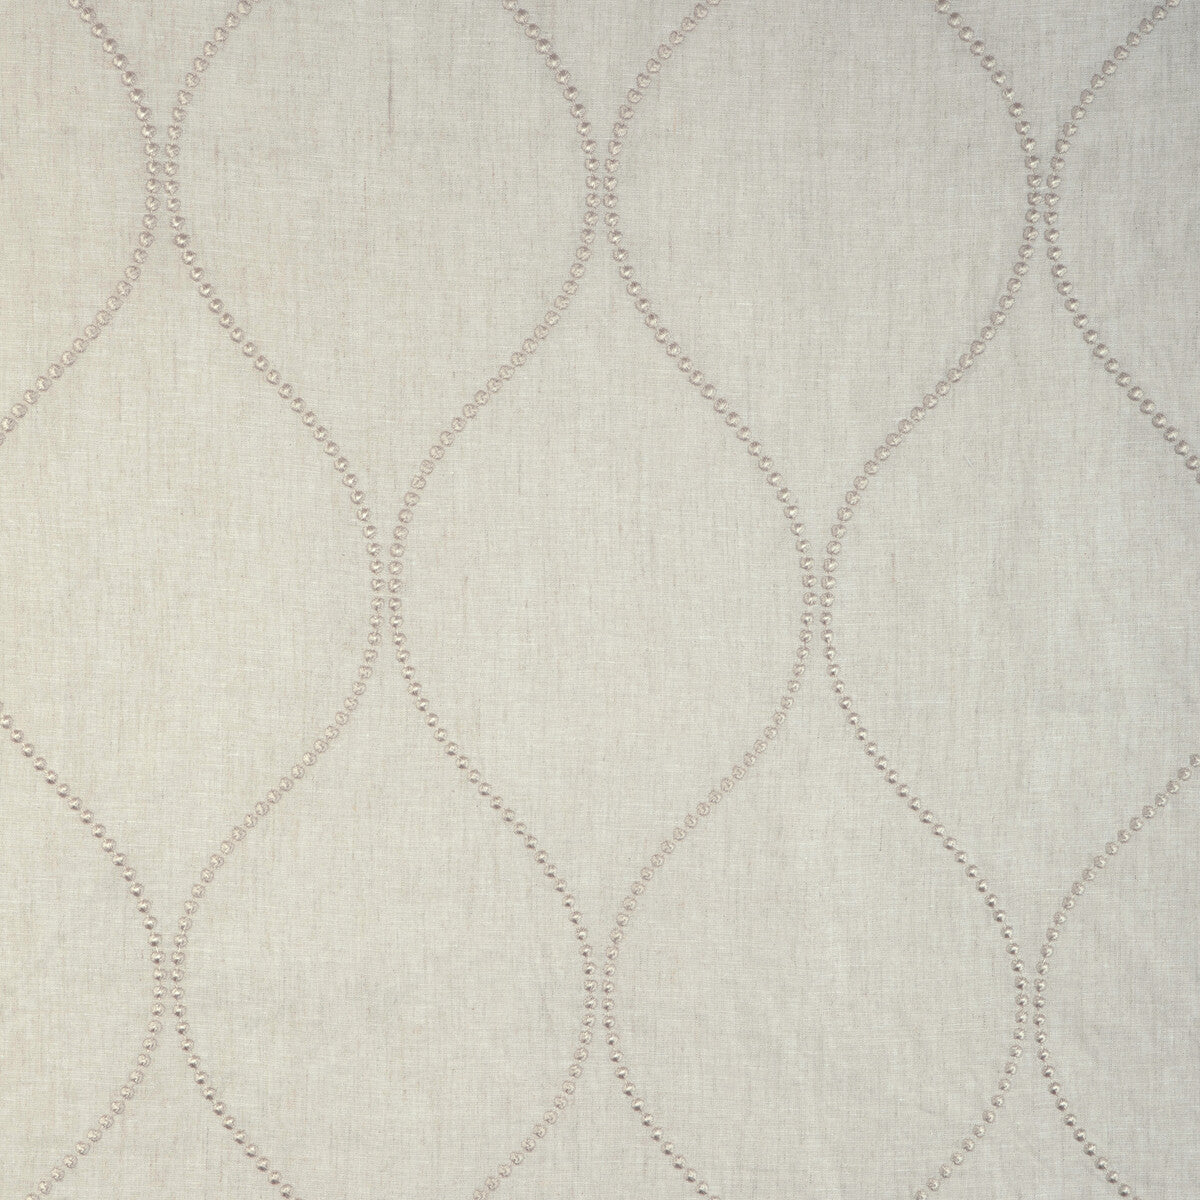 Kiley fabric in linen color - pattern 4201.106.0 - by Kravet Design in the Candice Olson collection